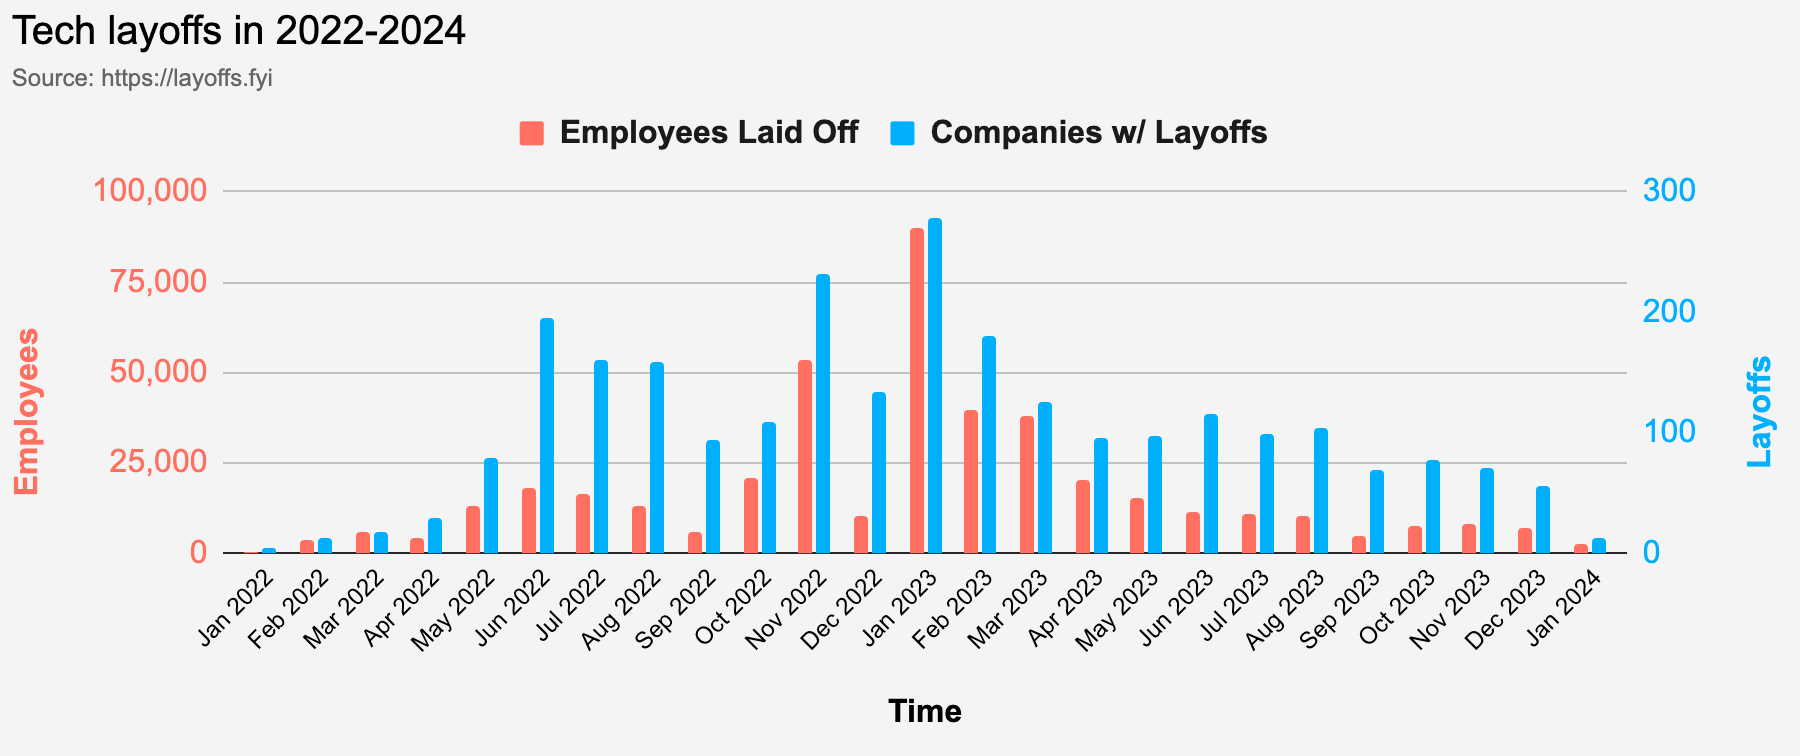 A graph showing tech layoff data over 2022-2024, showing a peak in the middle, around Jan 2023.